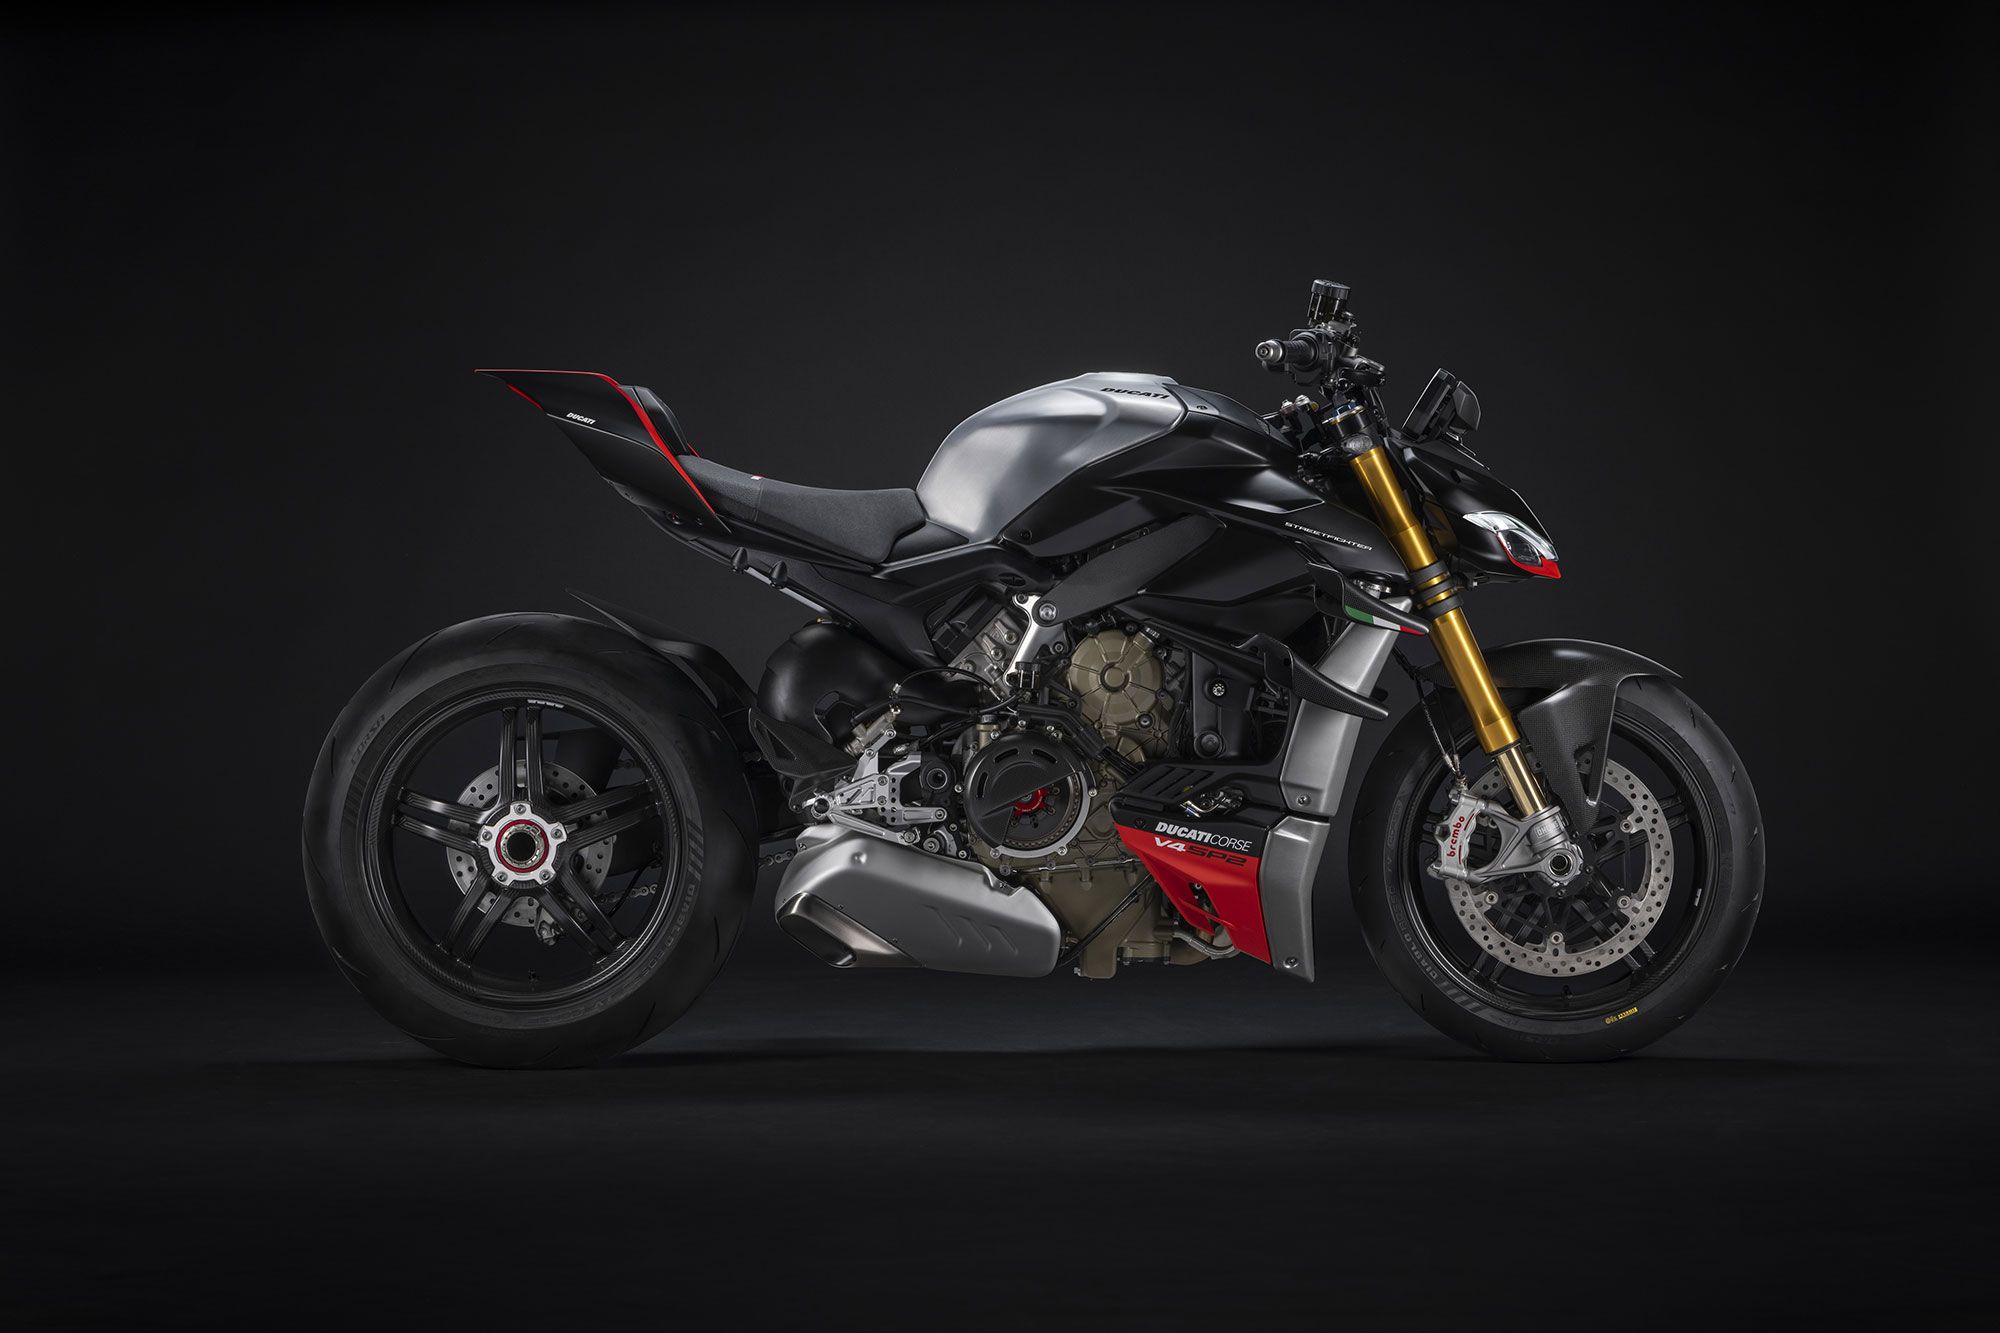 The Ducati Streetfighter V4 SP2 in Winter Test livery.